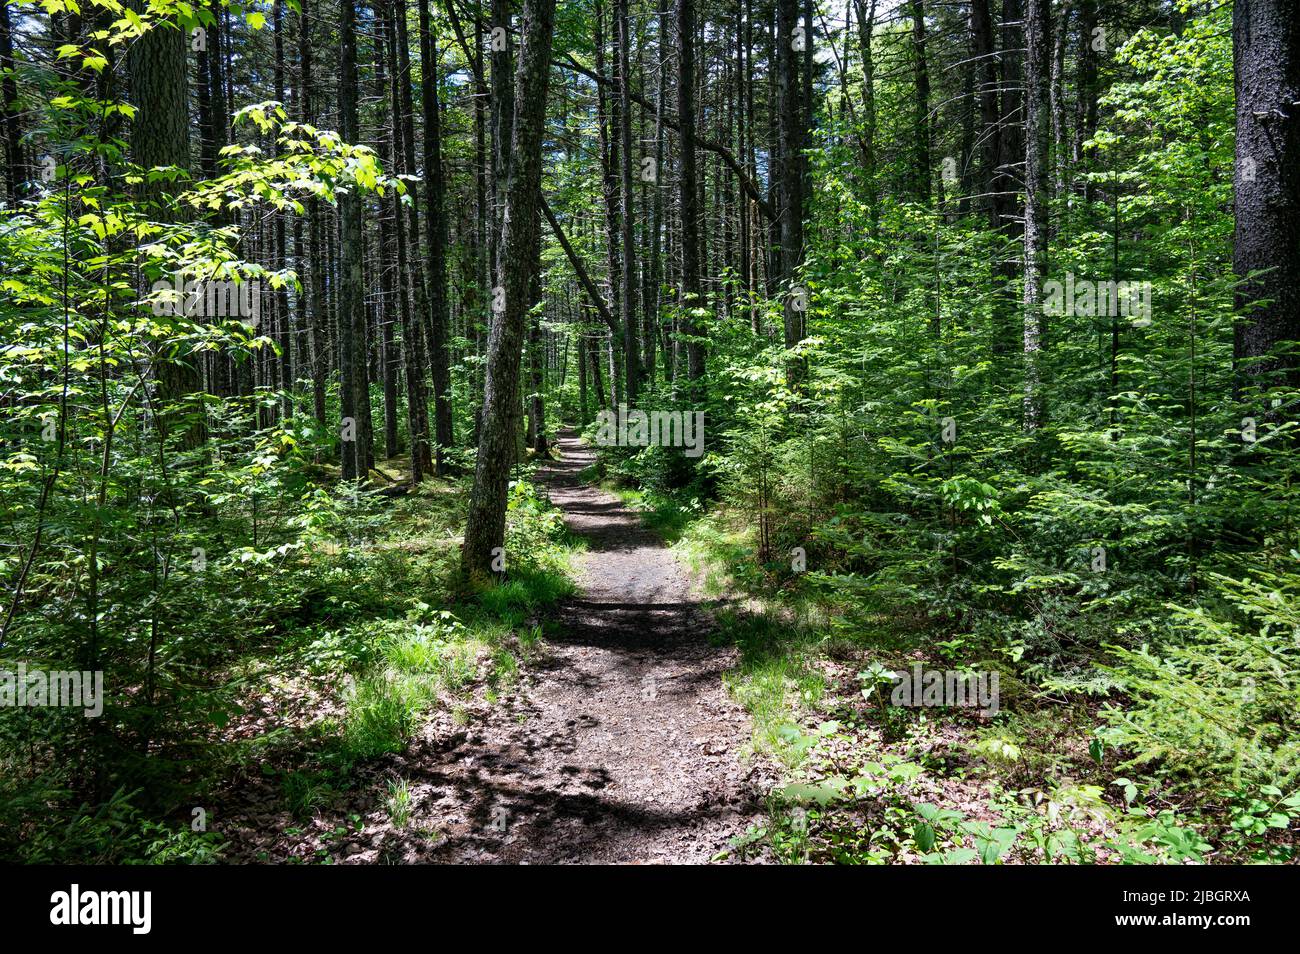 A trail through the wilderness in the Adirondack Mountains, NY USA Stock Photo